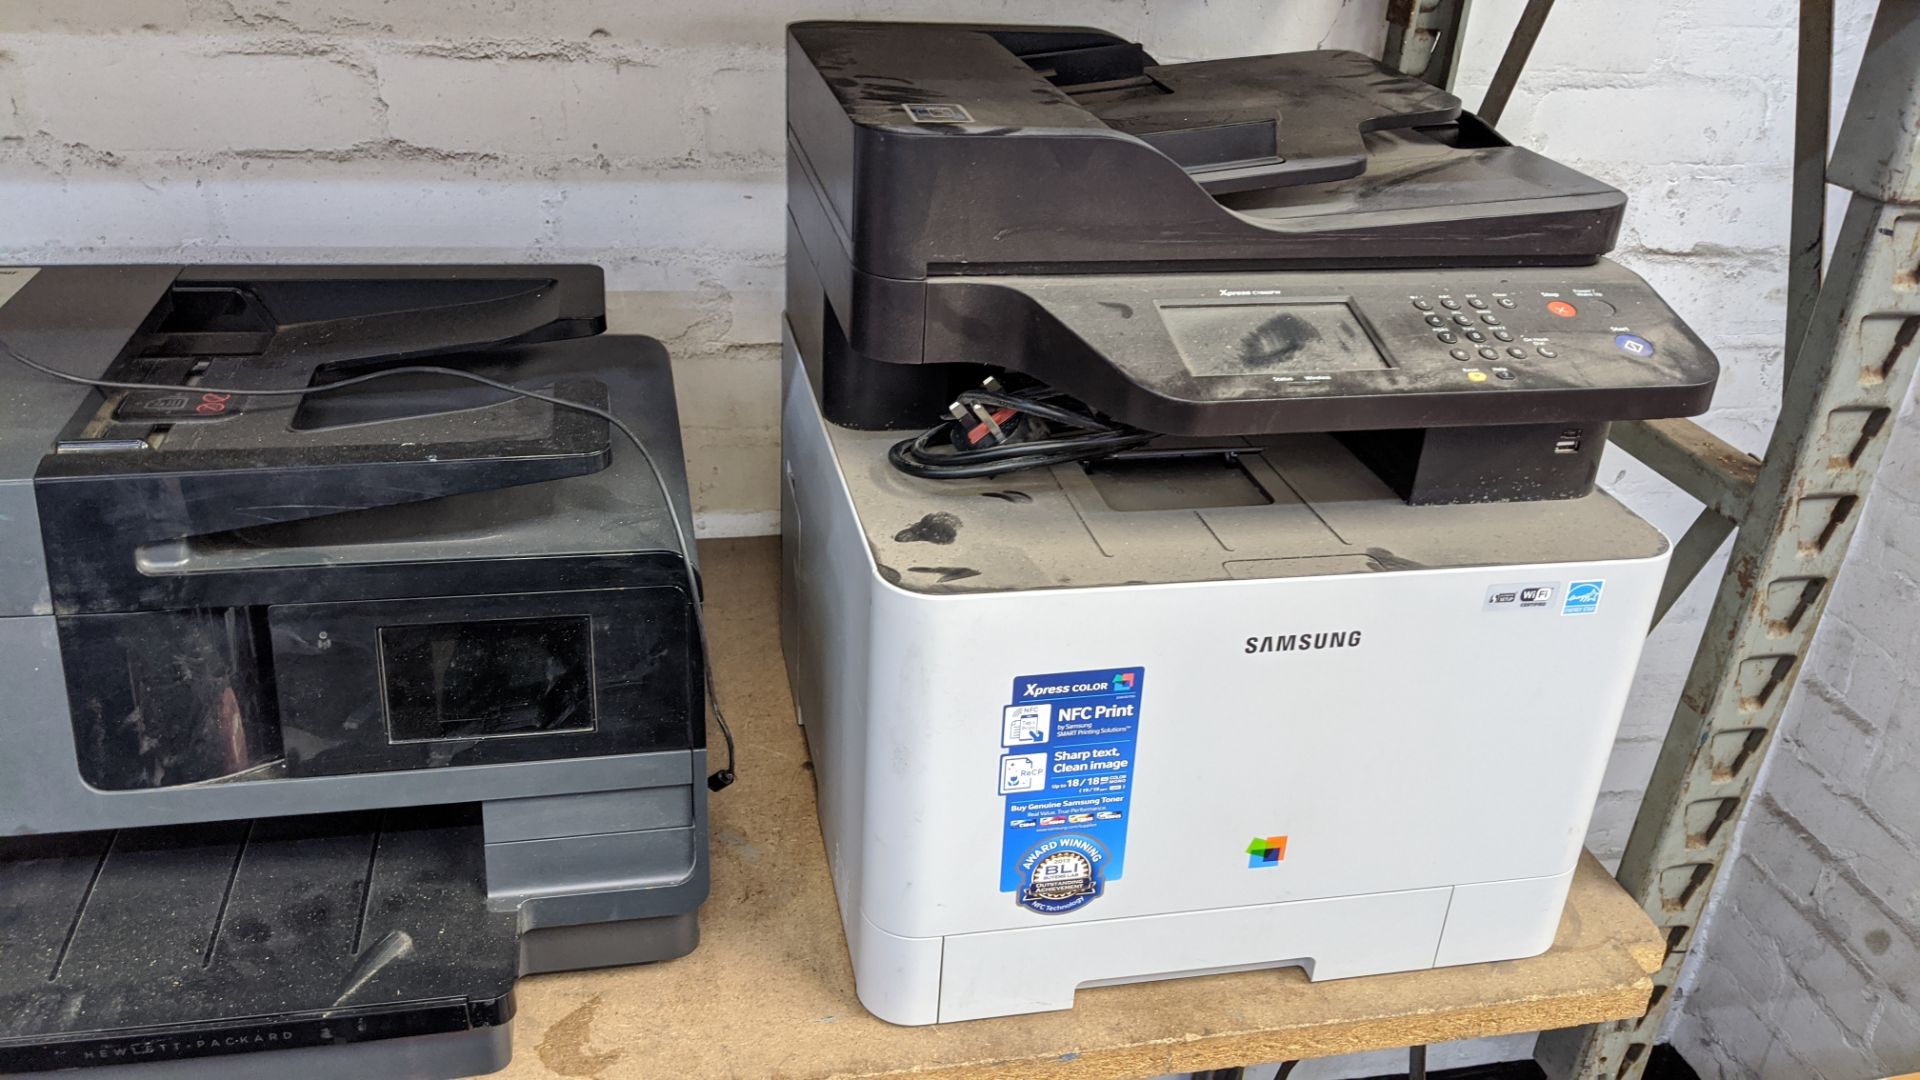 Contents of 2 shelves of assorted IT equipment including telephones, printers, computers, dash cams, - Image 6 of 13